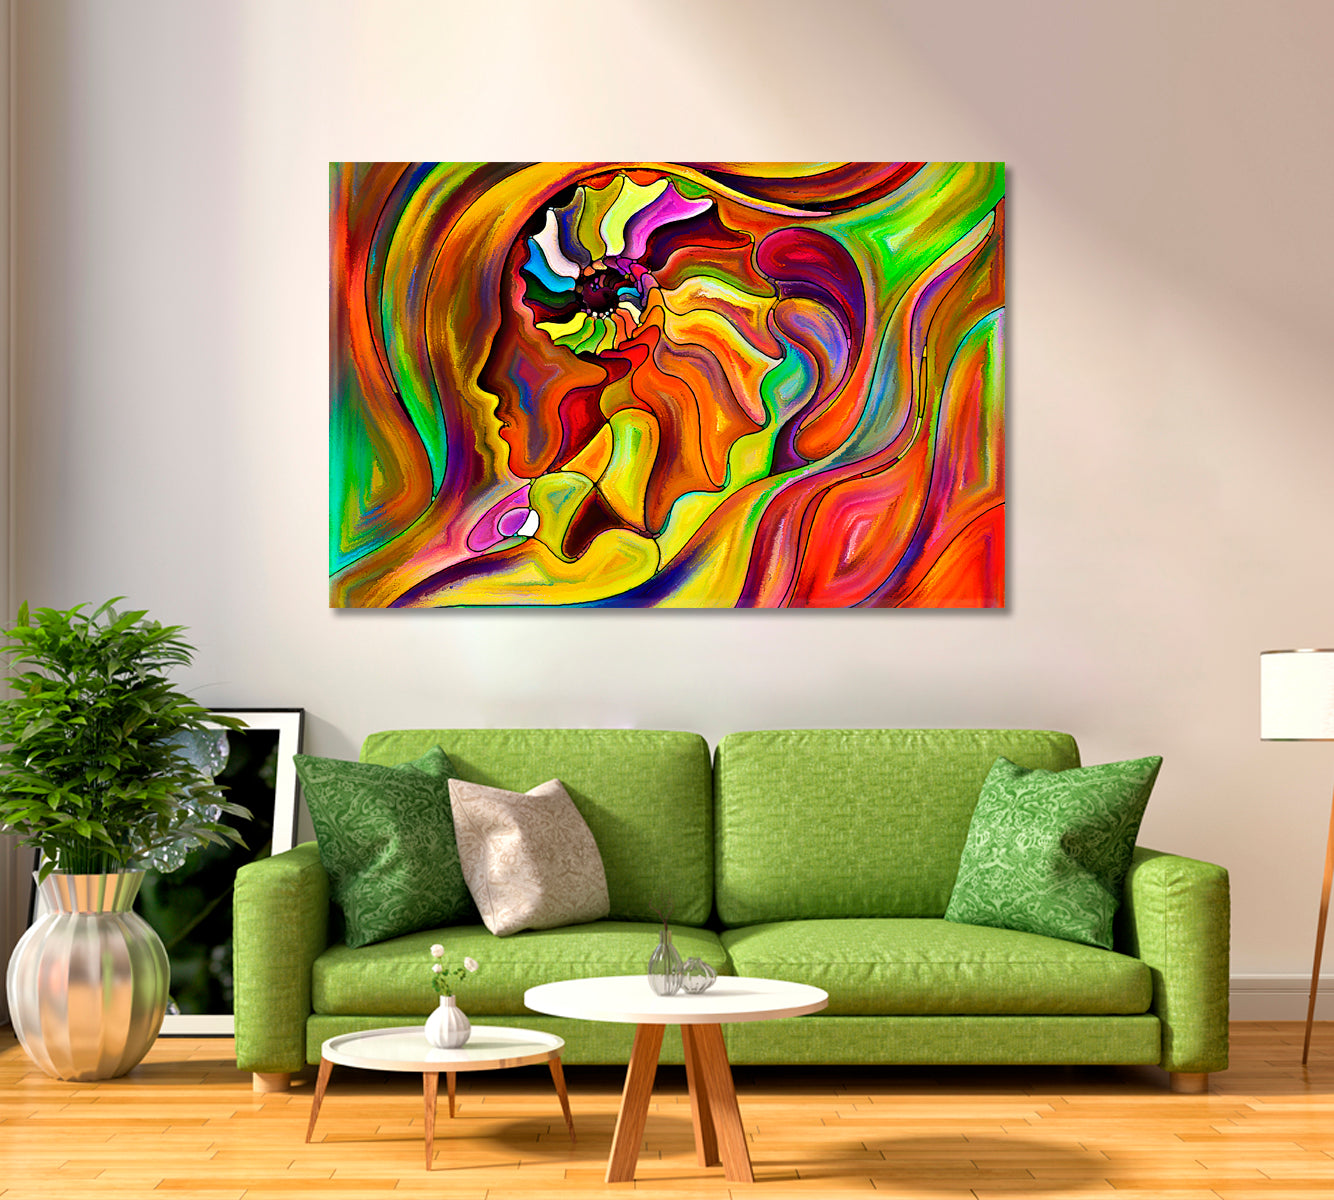 Life Forms And Lines Abstract Design Abstract Art Print Artesty 1 panel 24" x 16" 